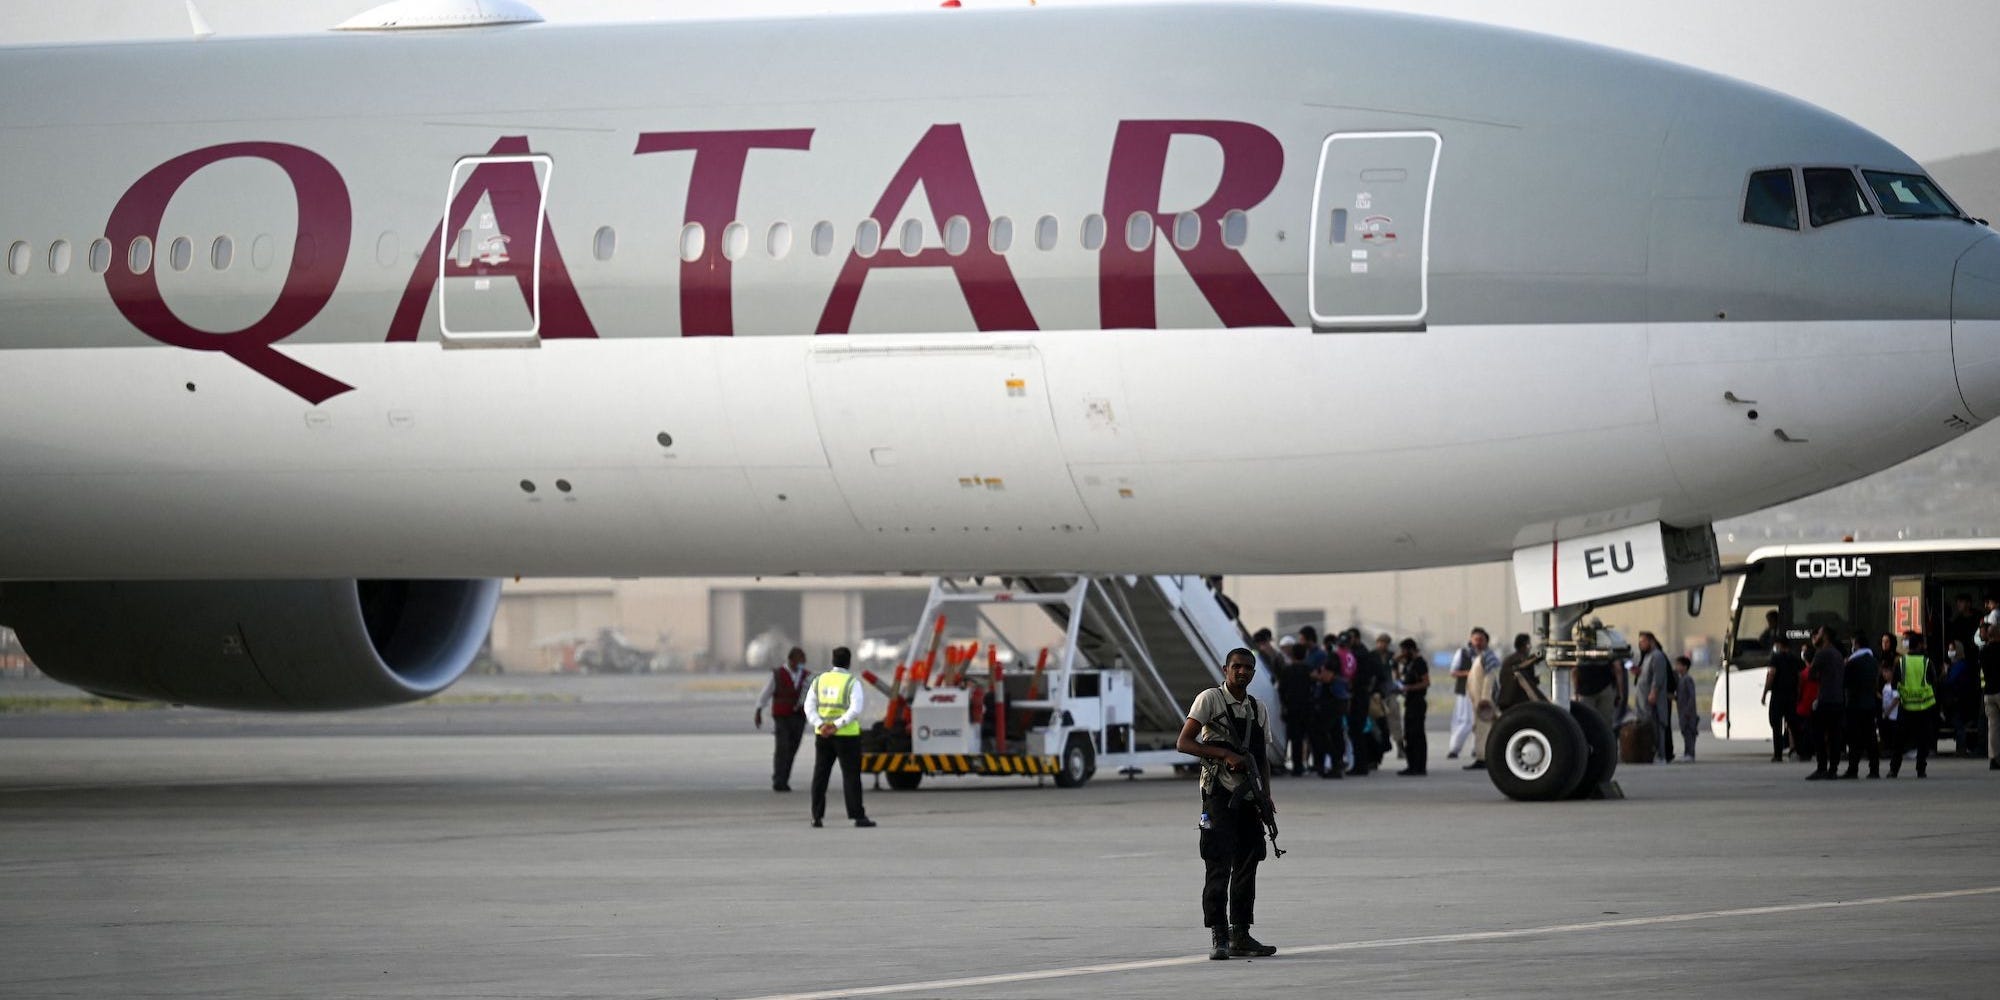 A Qatari security personnel stands guard (front) as passengers board a Qatar Airways aircraft bound to Qatar at the airport in Kabul on September 10, 2021.